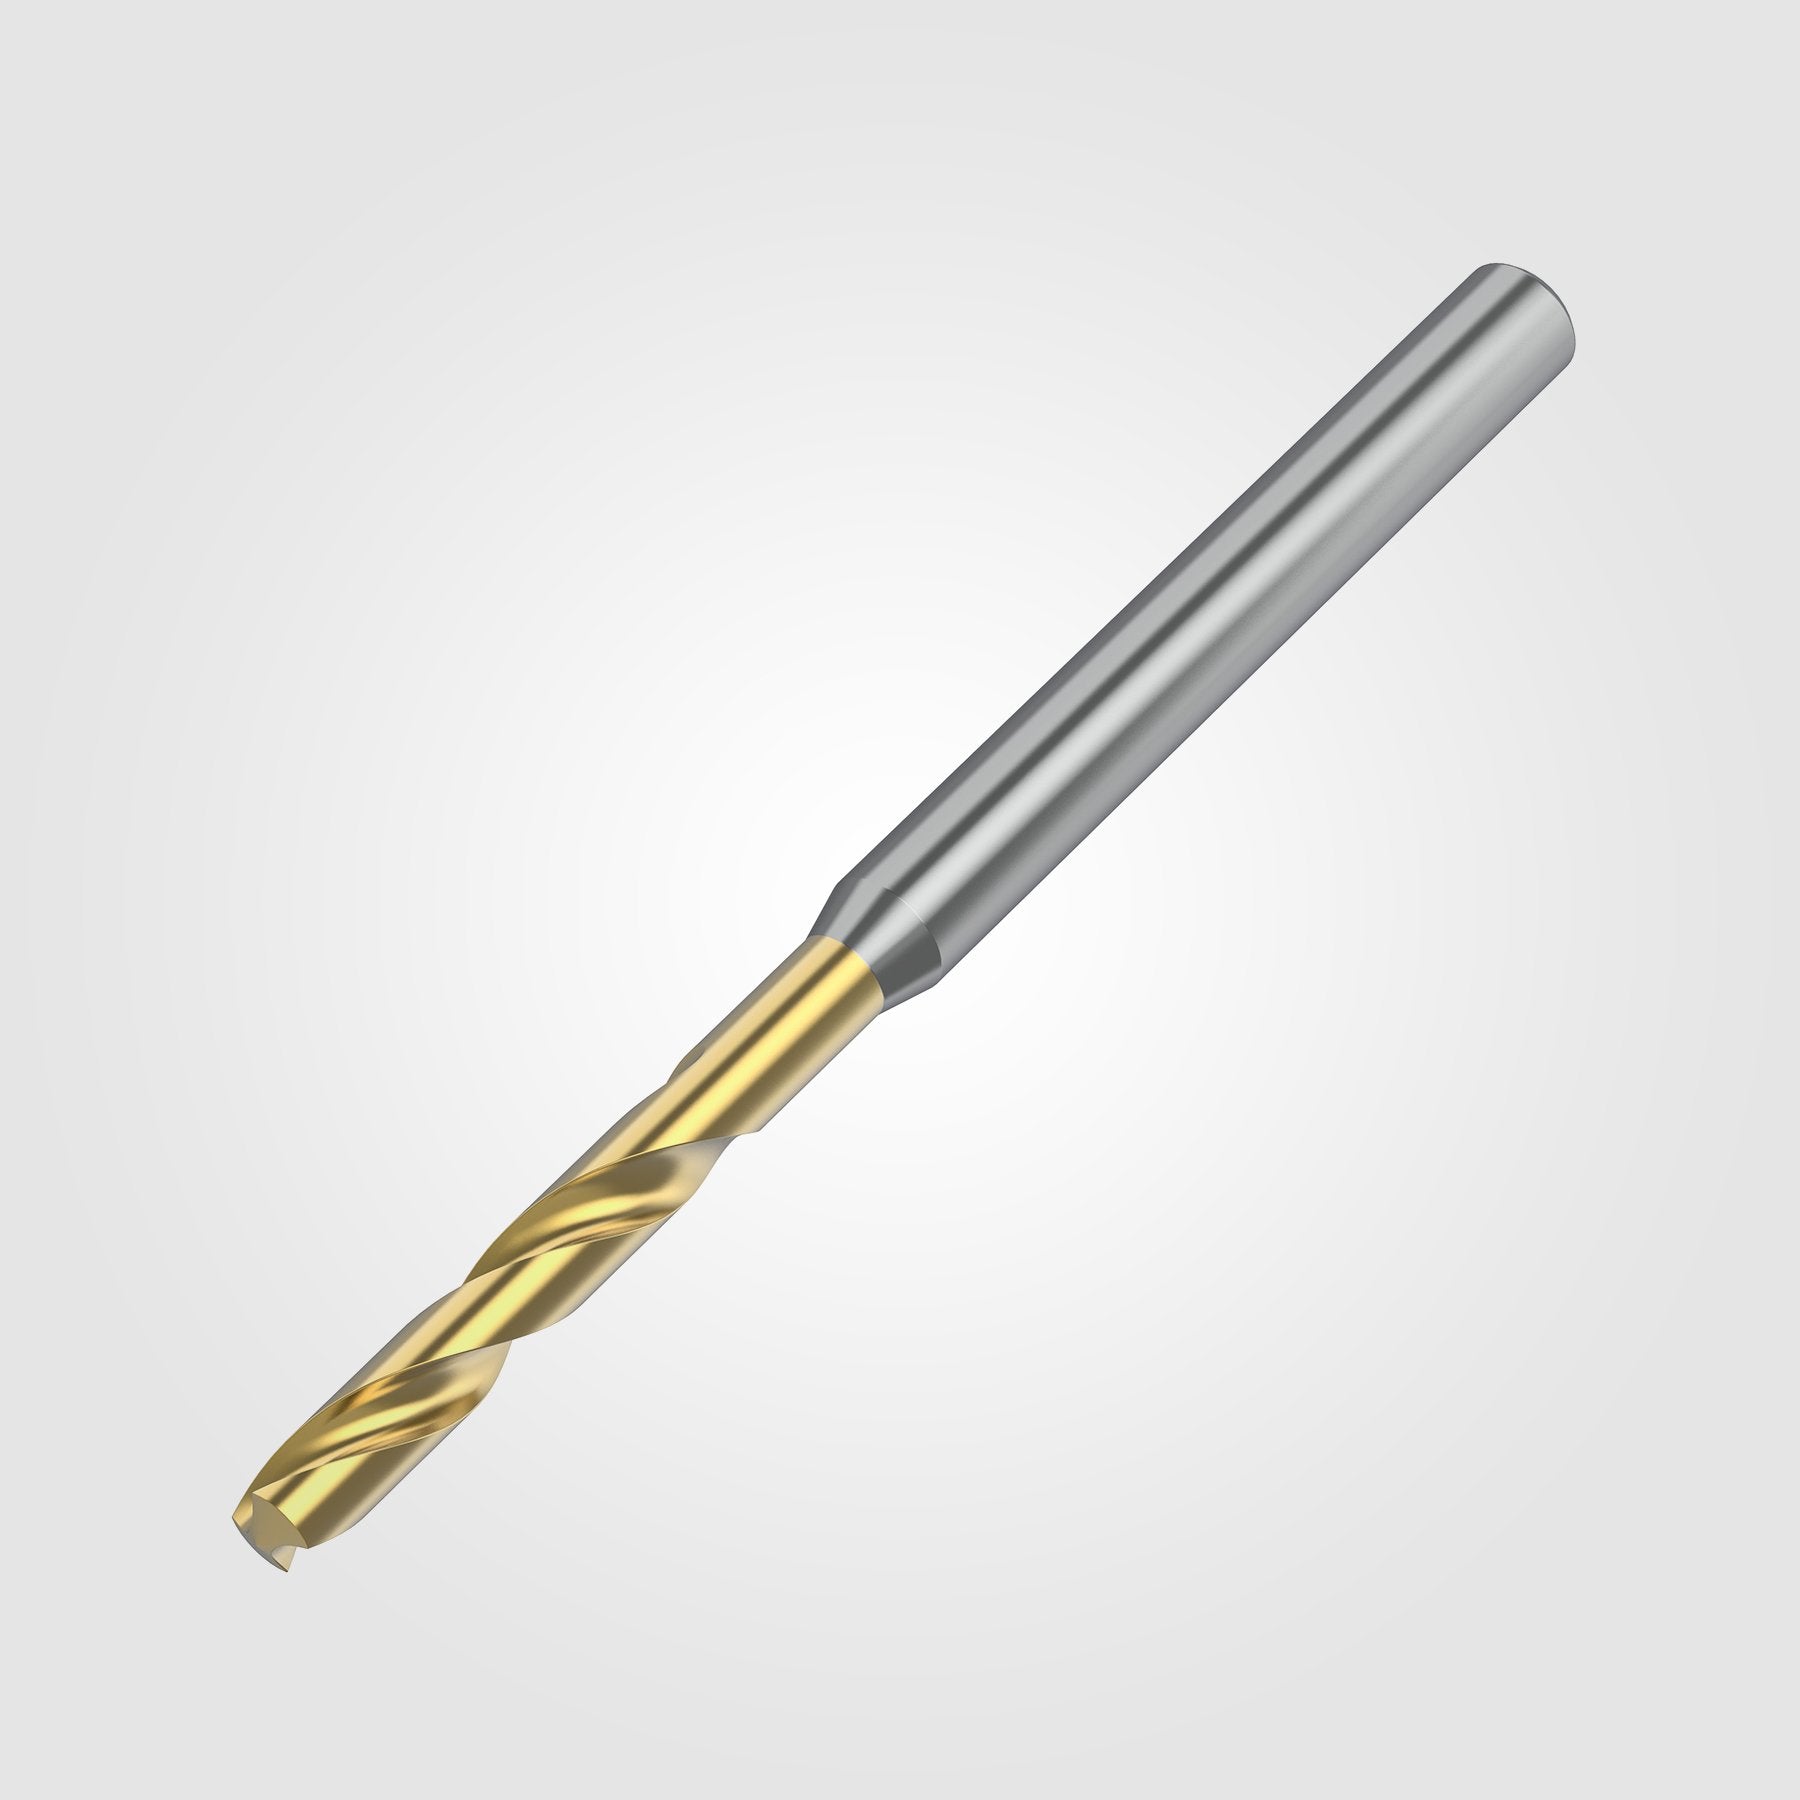 GOdrill (THROUGH COOLANT) | 11.509mm / .4531" / 3xD | SOLID CARBIDE DRILL | 4151223